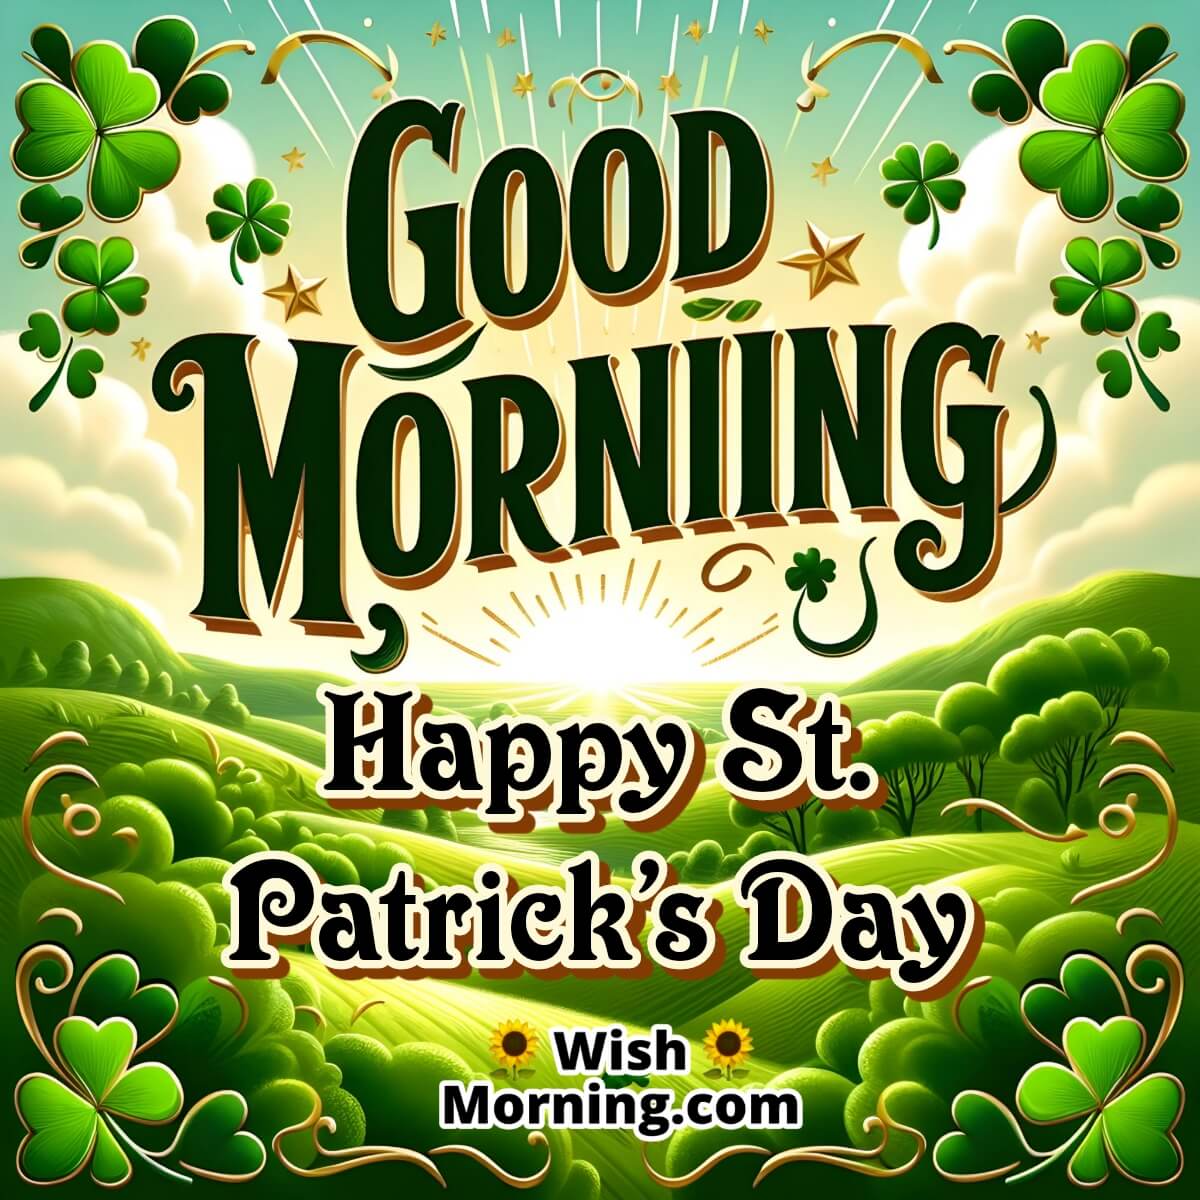 Good Morning St. Patrick's Day Images